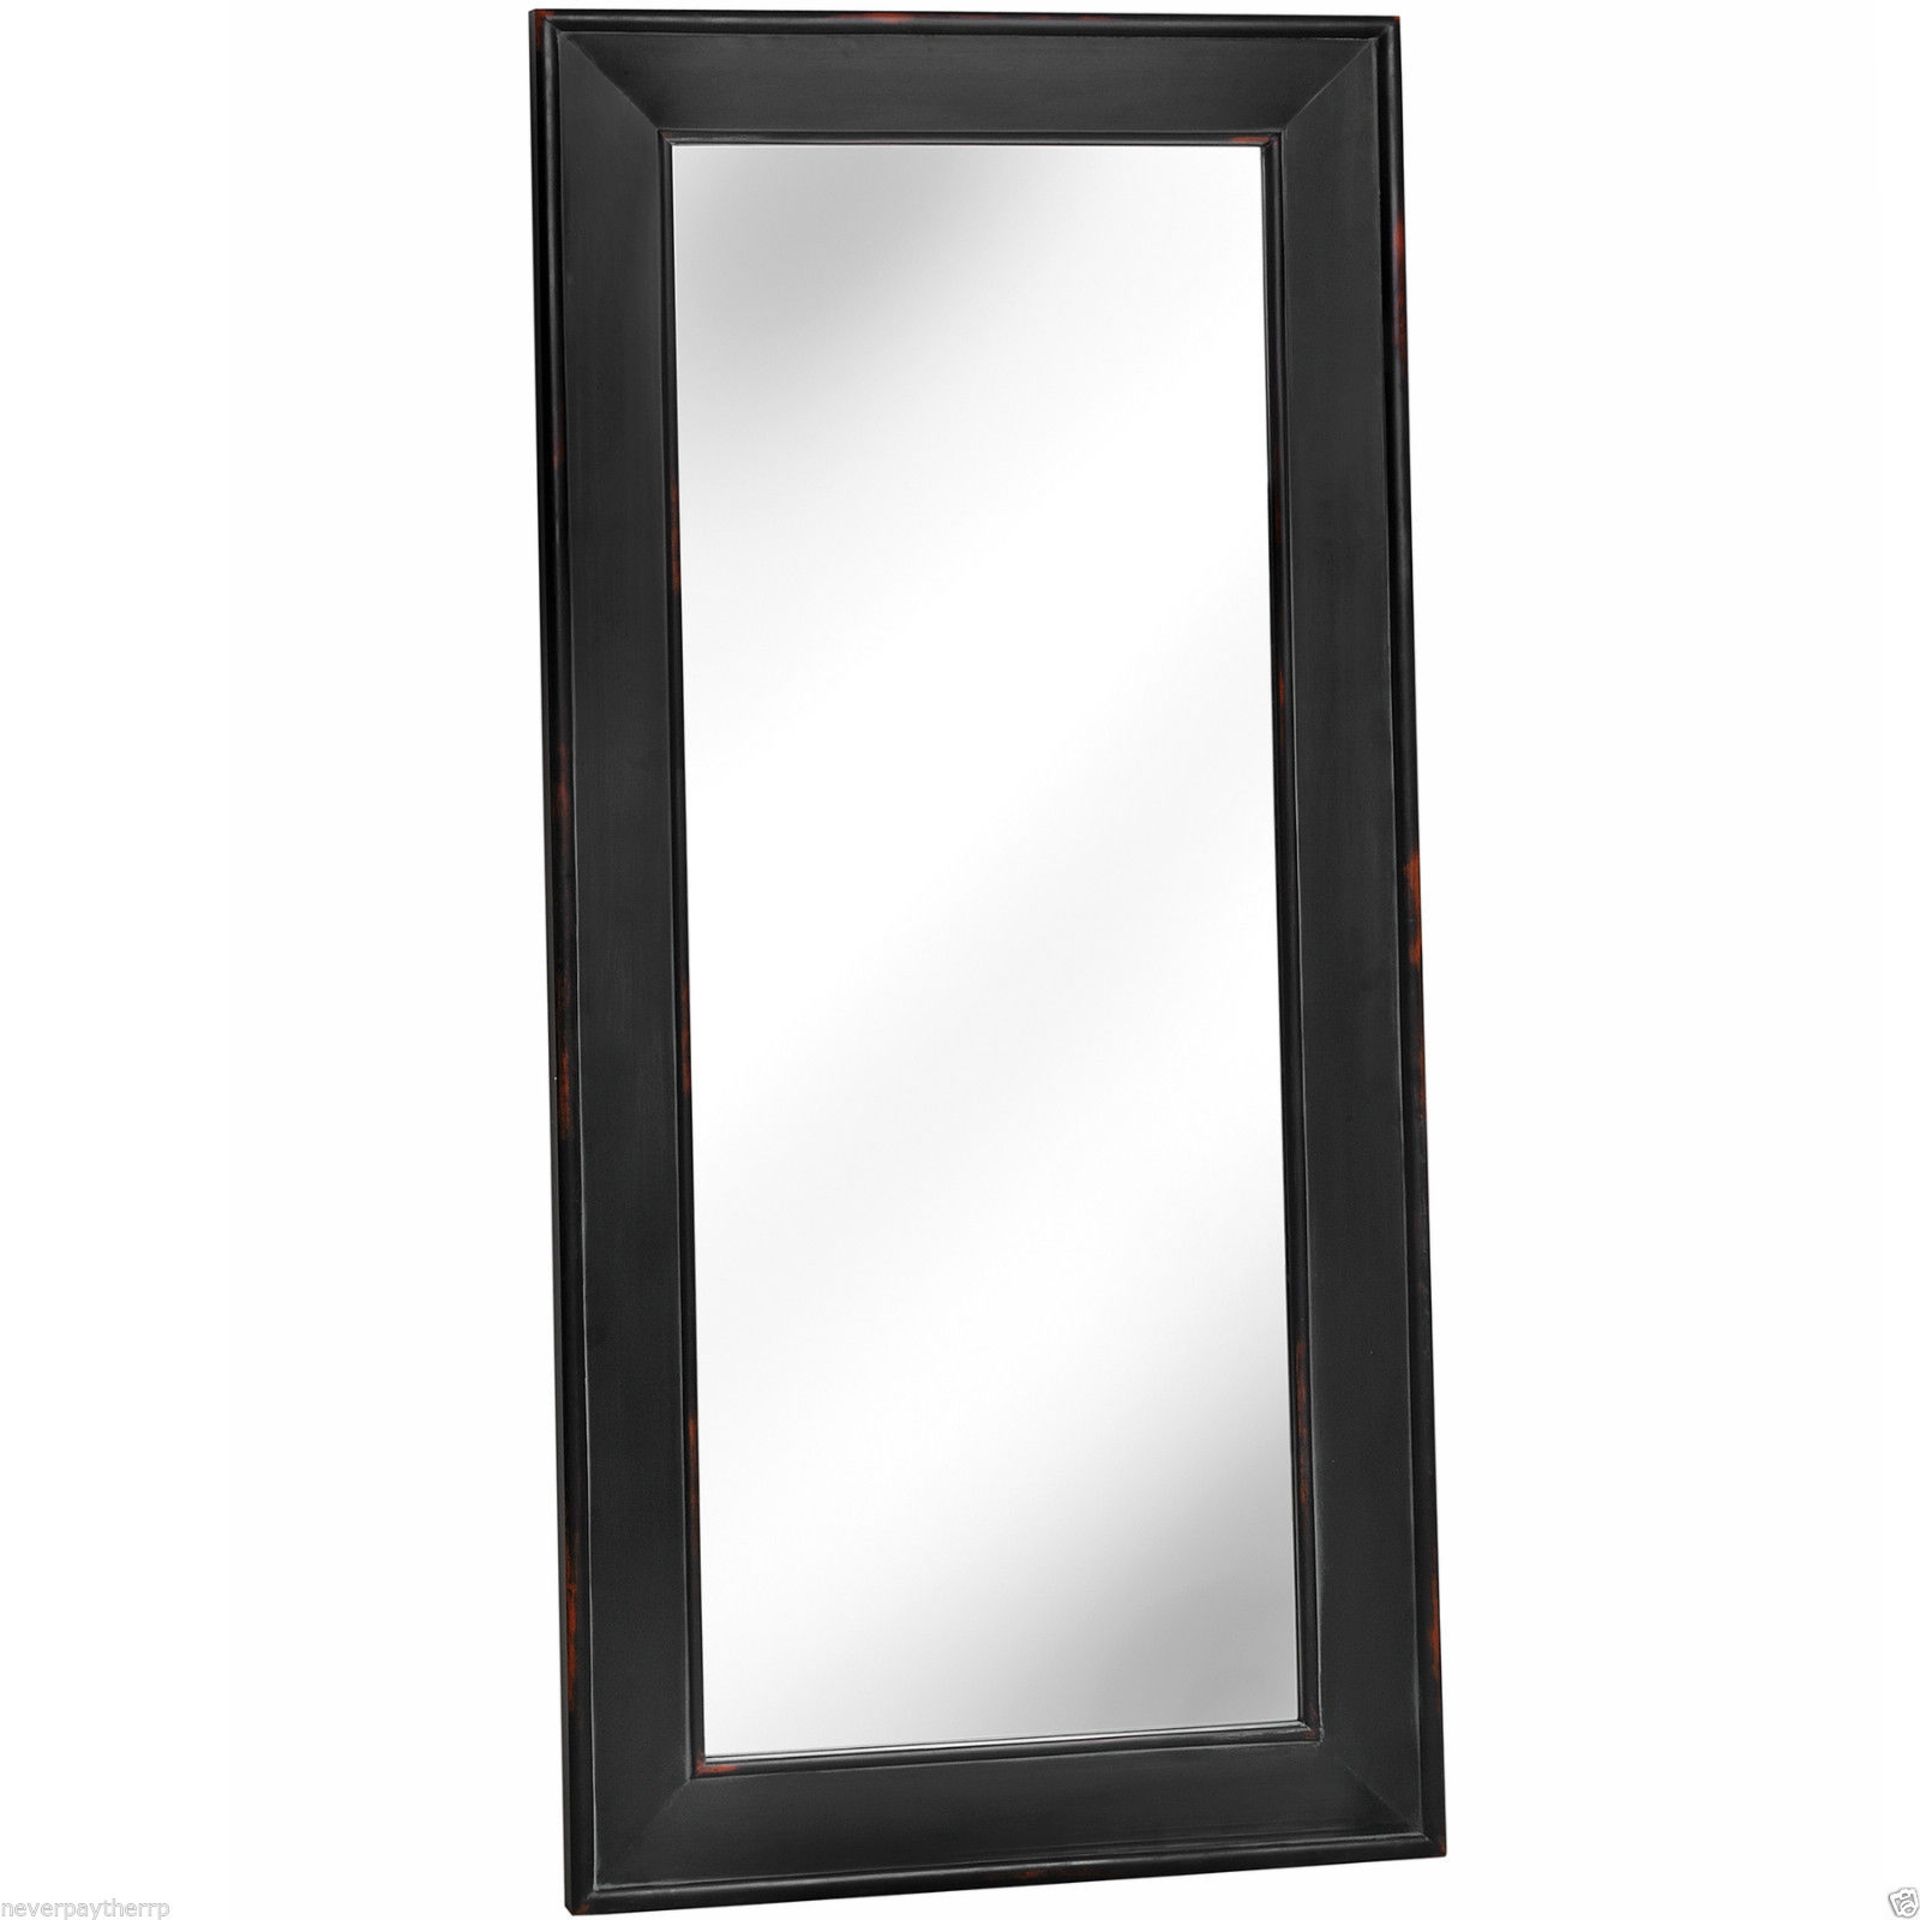 NEW Huge Noir Black Rectangular Mirror, Shabby Chic MPN 13558 RRP £350 New & boxed perfect stock. - Image 4 of 4